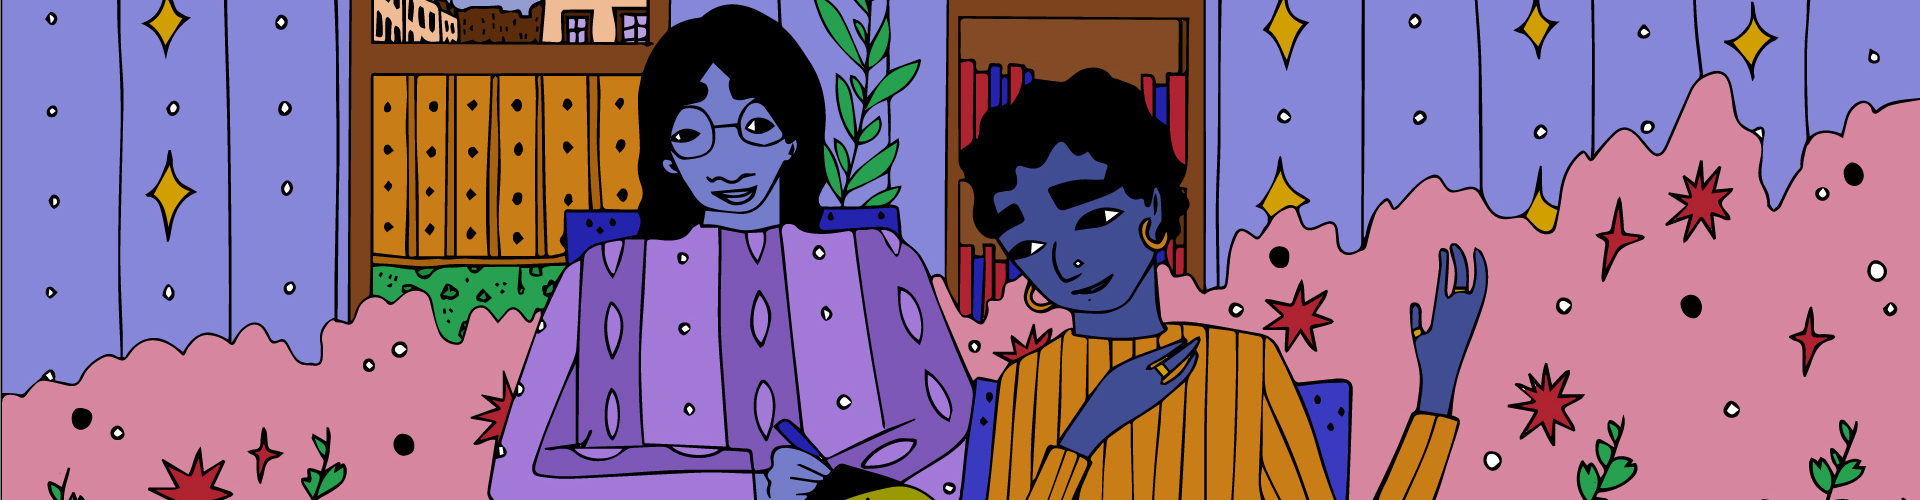 A colourful illustration of a young queer person discussing their mental health openly with a therapist. They are in a safe and colourful environment.